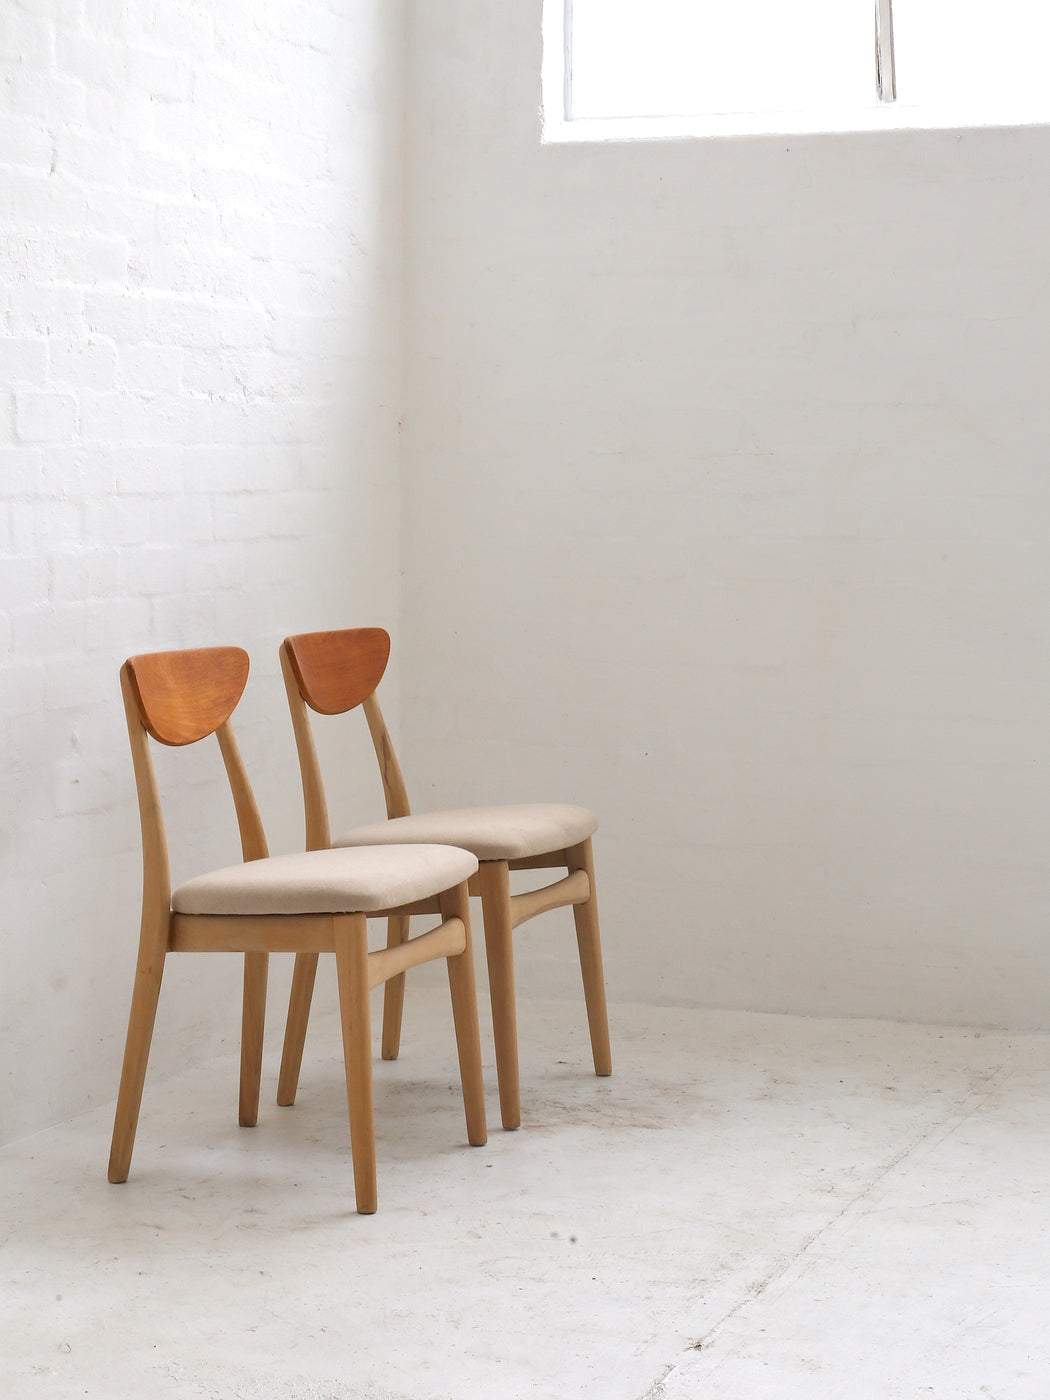 Japanese Dining Chairs